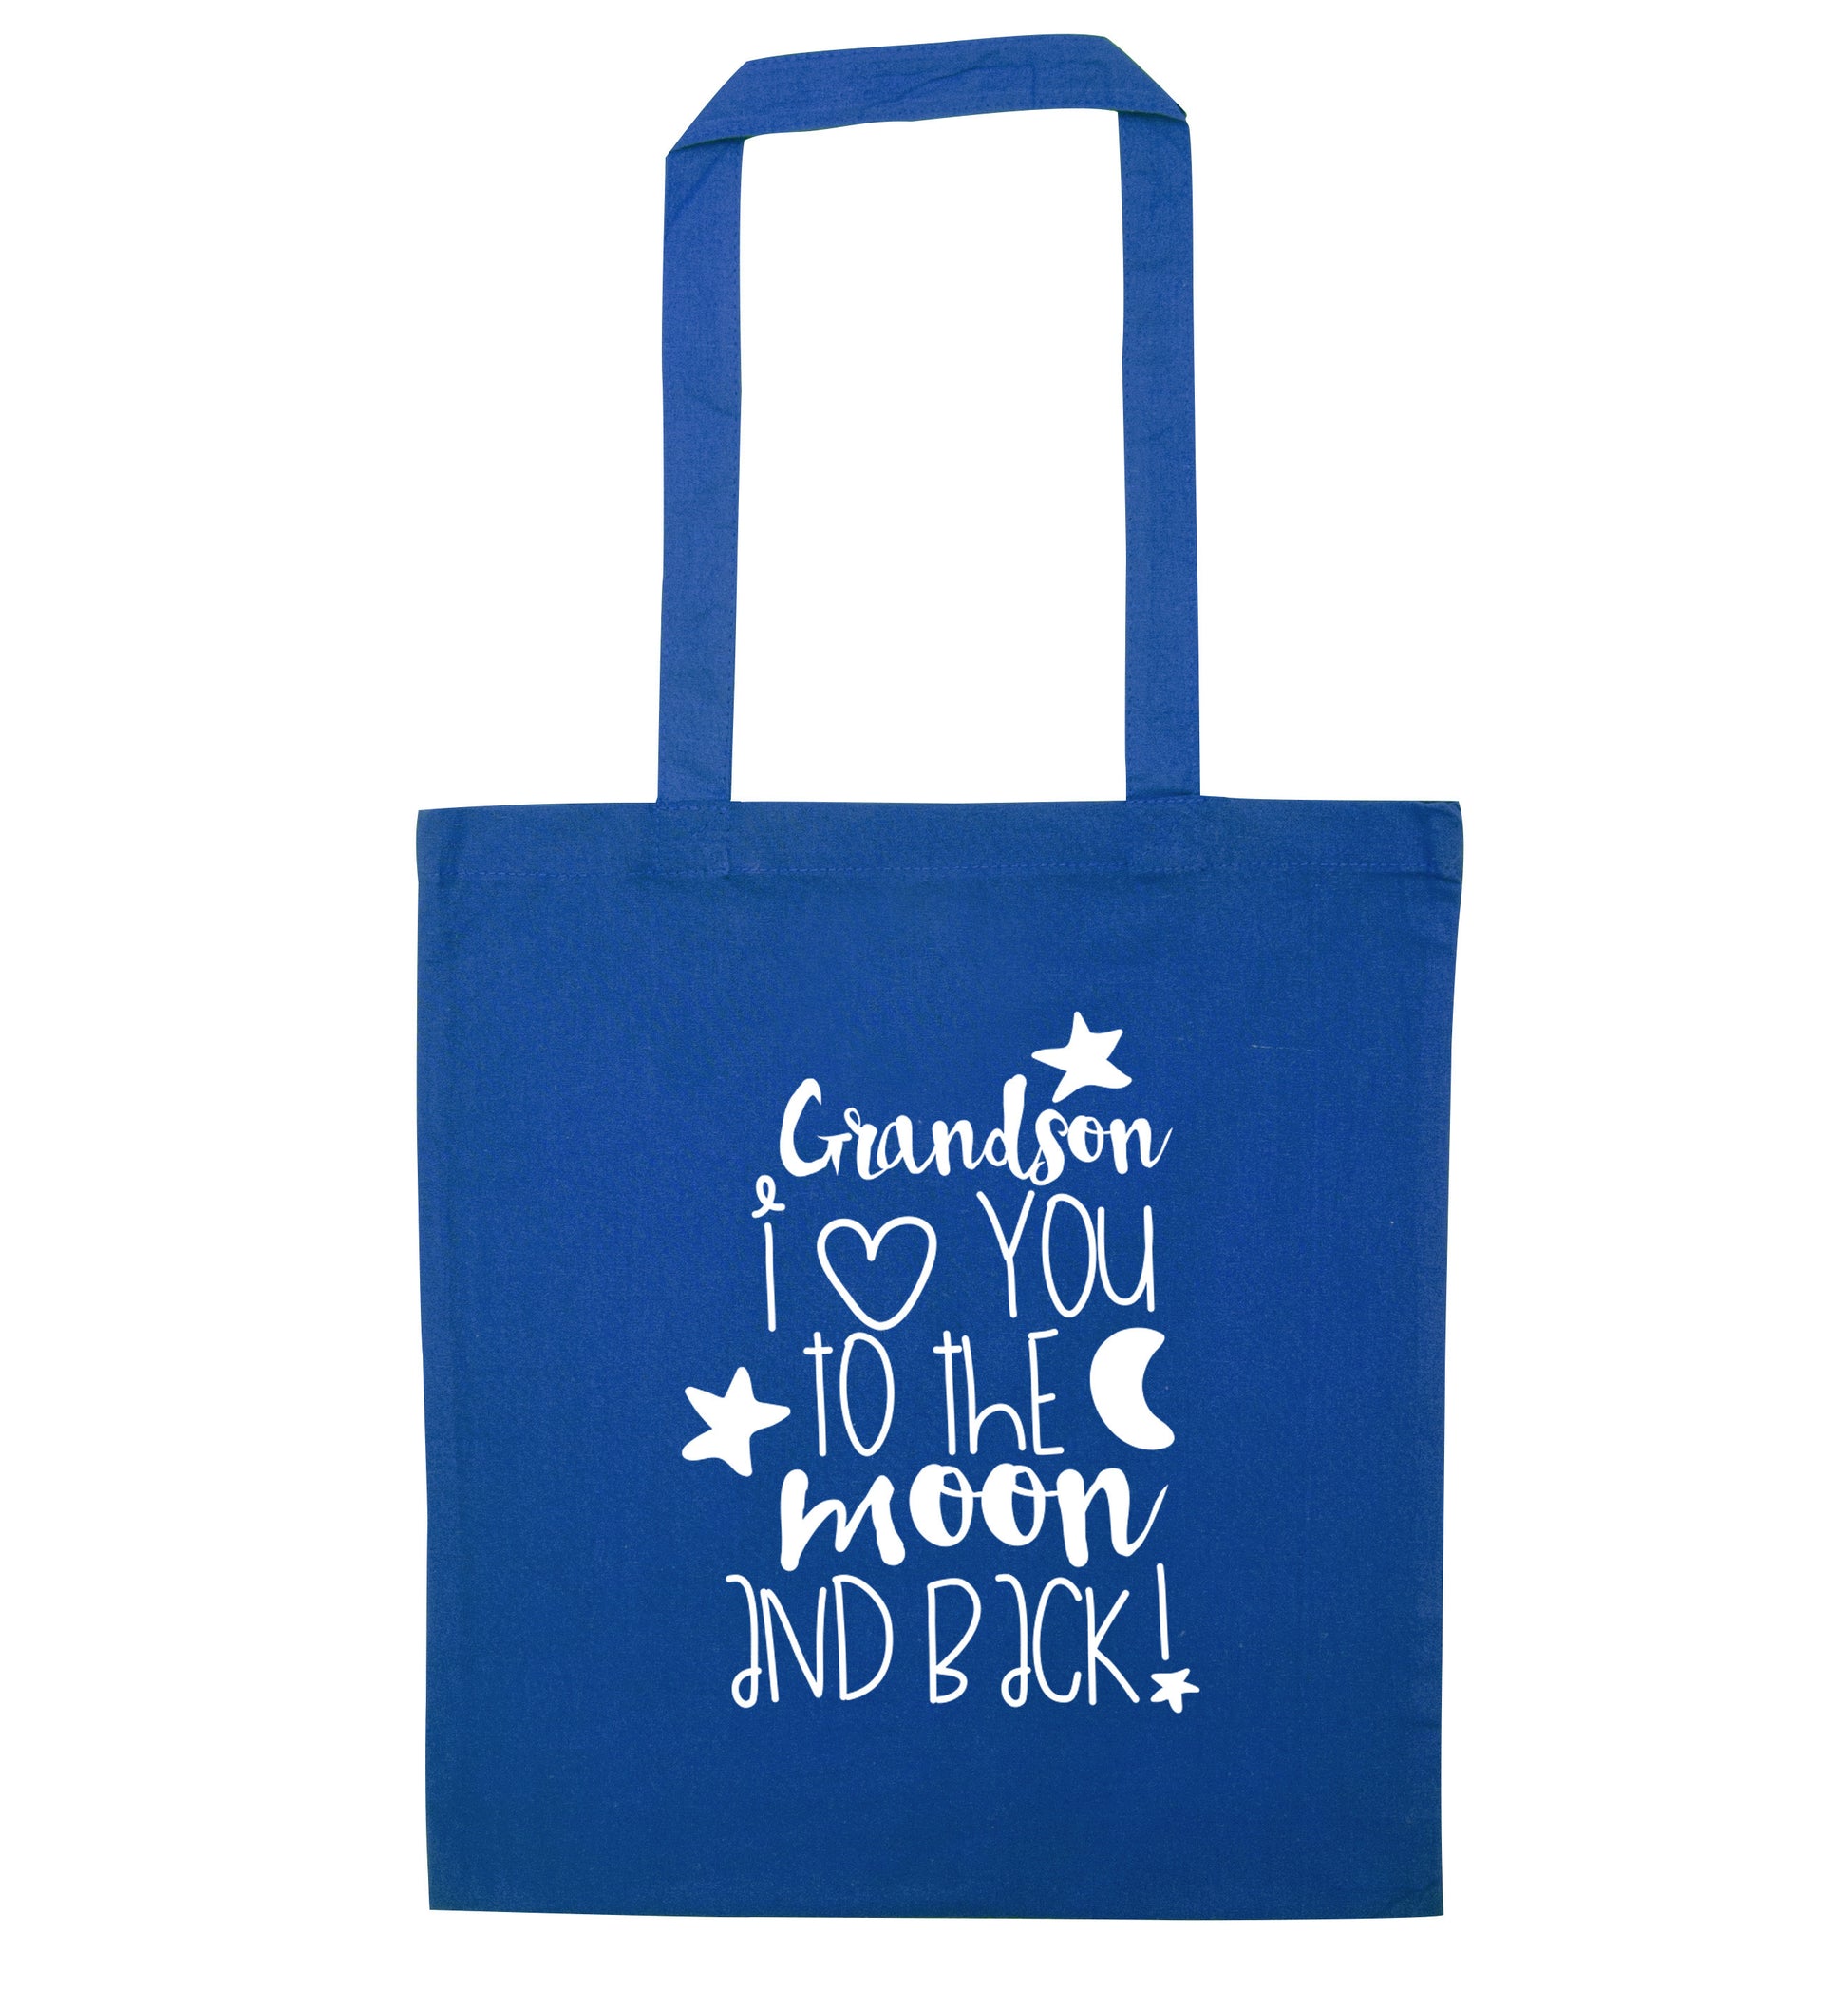 Grandson I love you to the moon and back blue tote bag